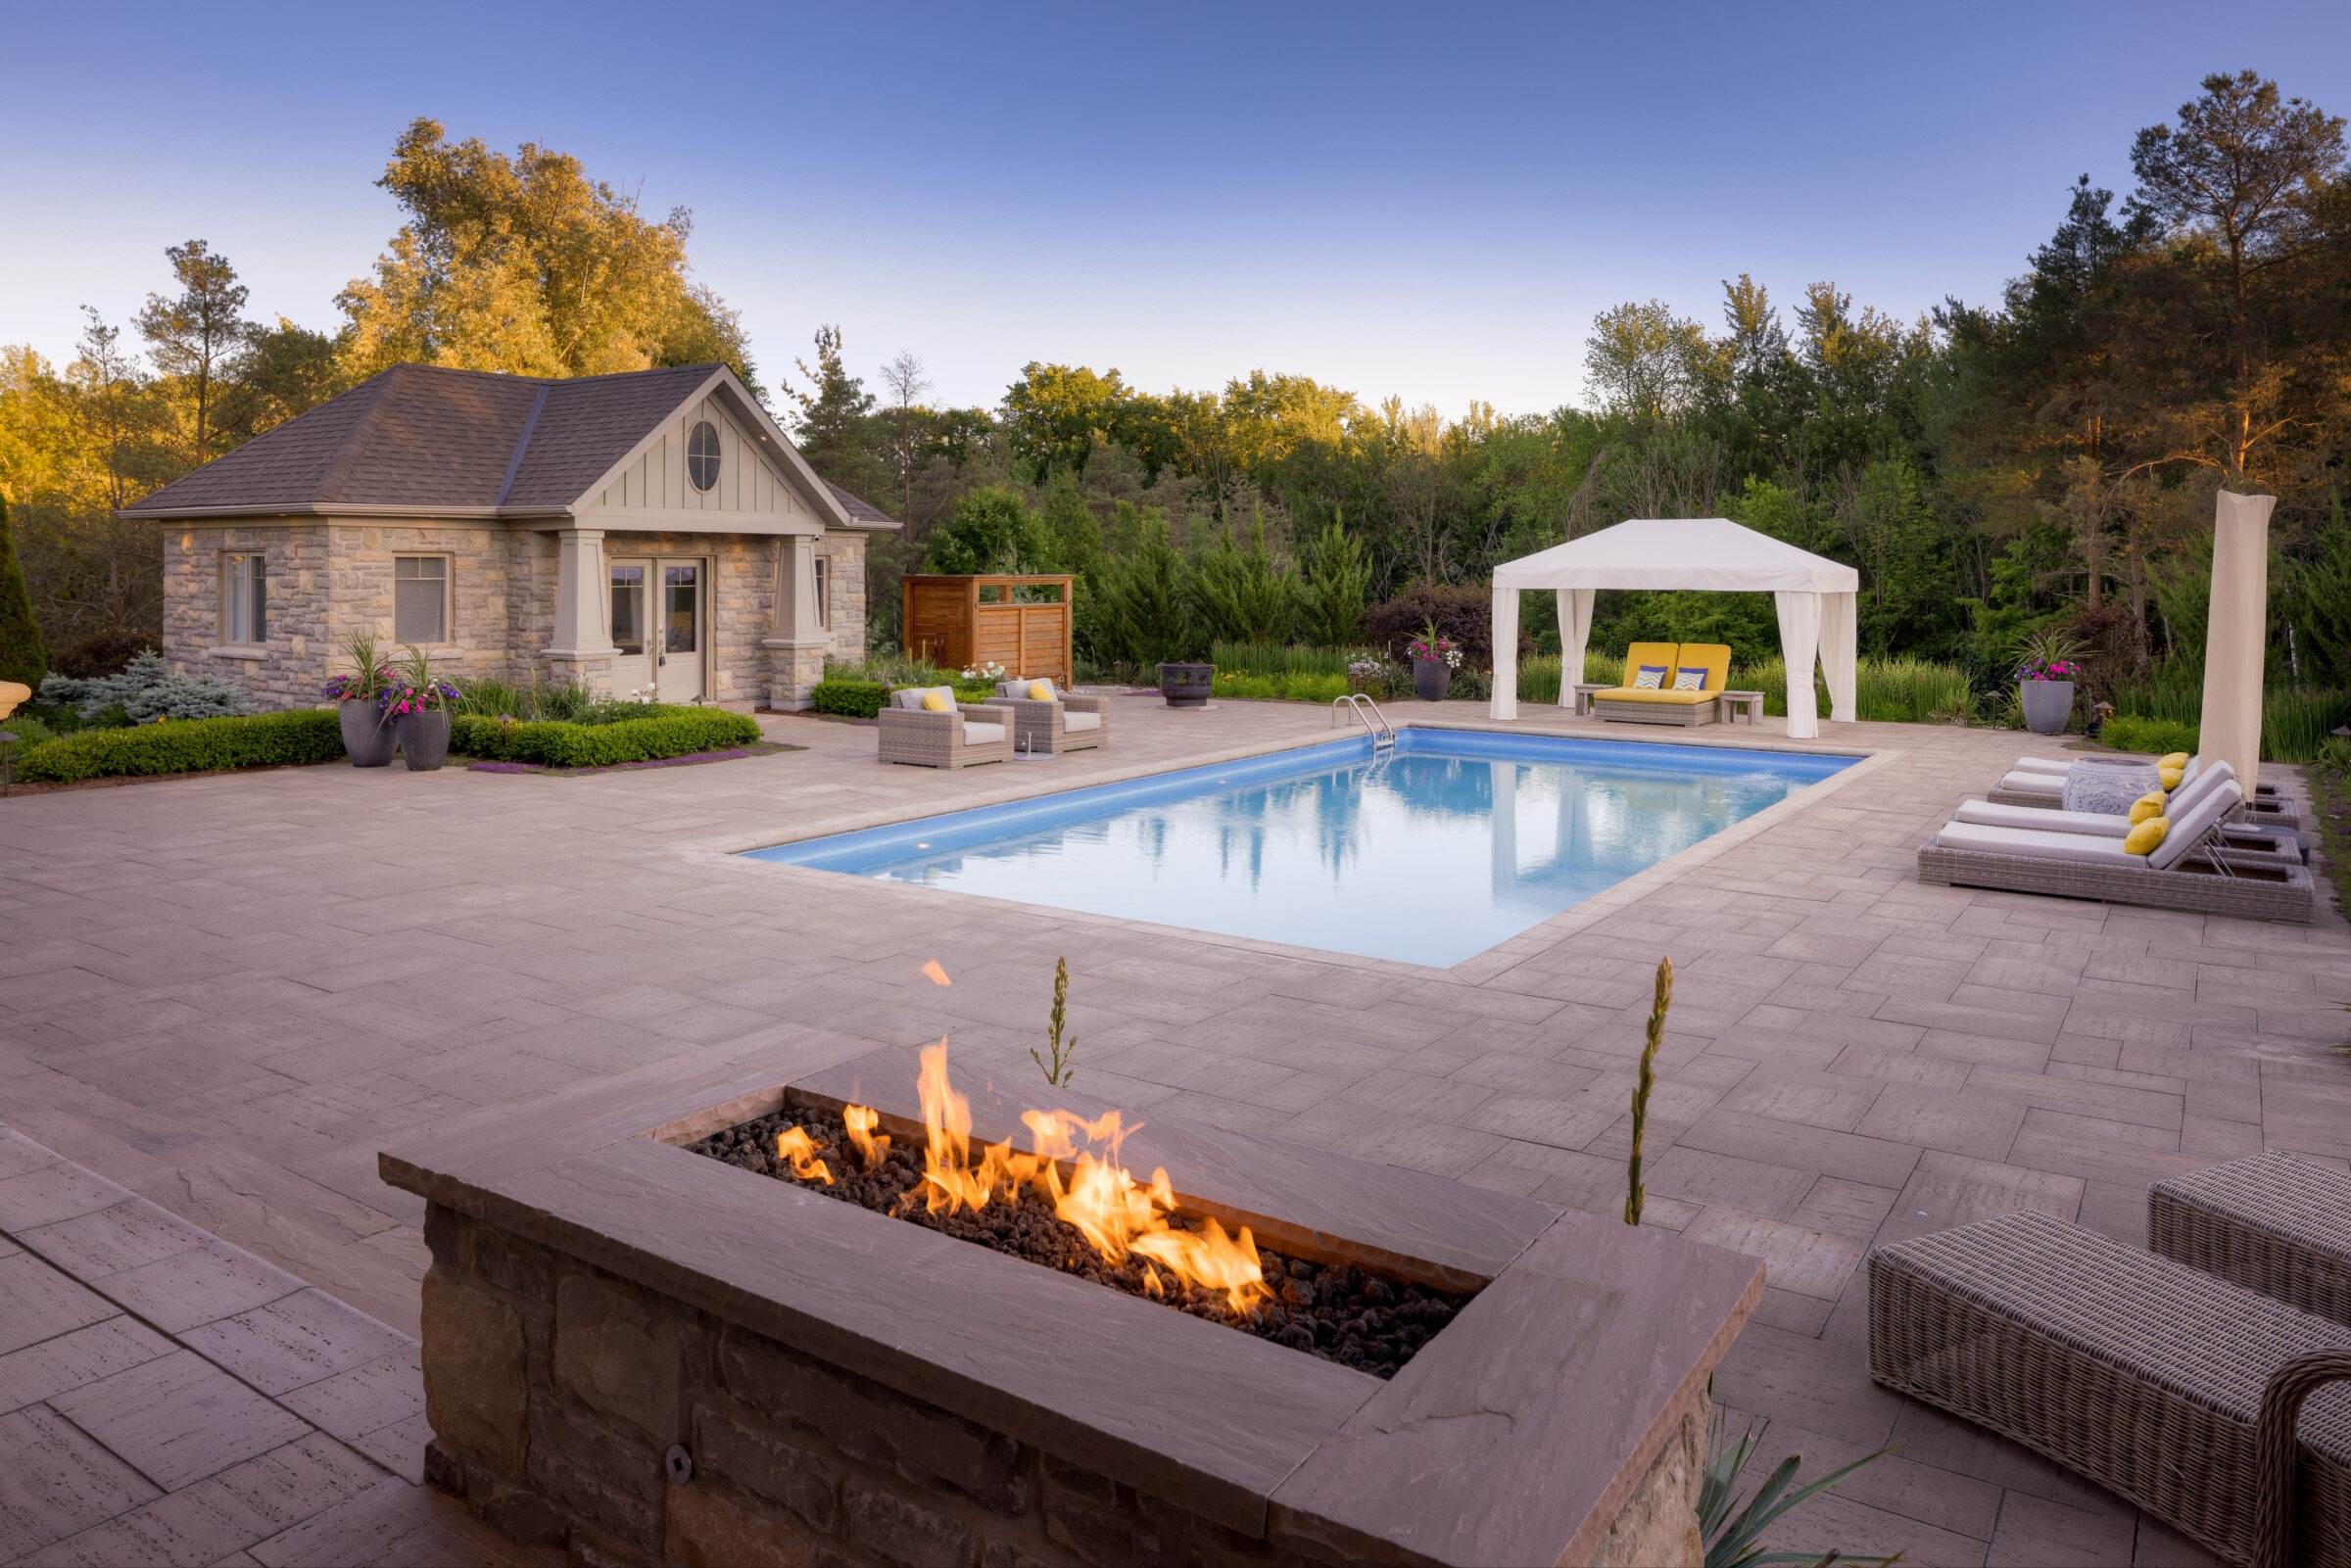 An elegant backyard with a swimming pool, patio, outdoor firepit, lounging area, and pool house, surrounded by trees at twilight.